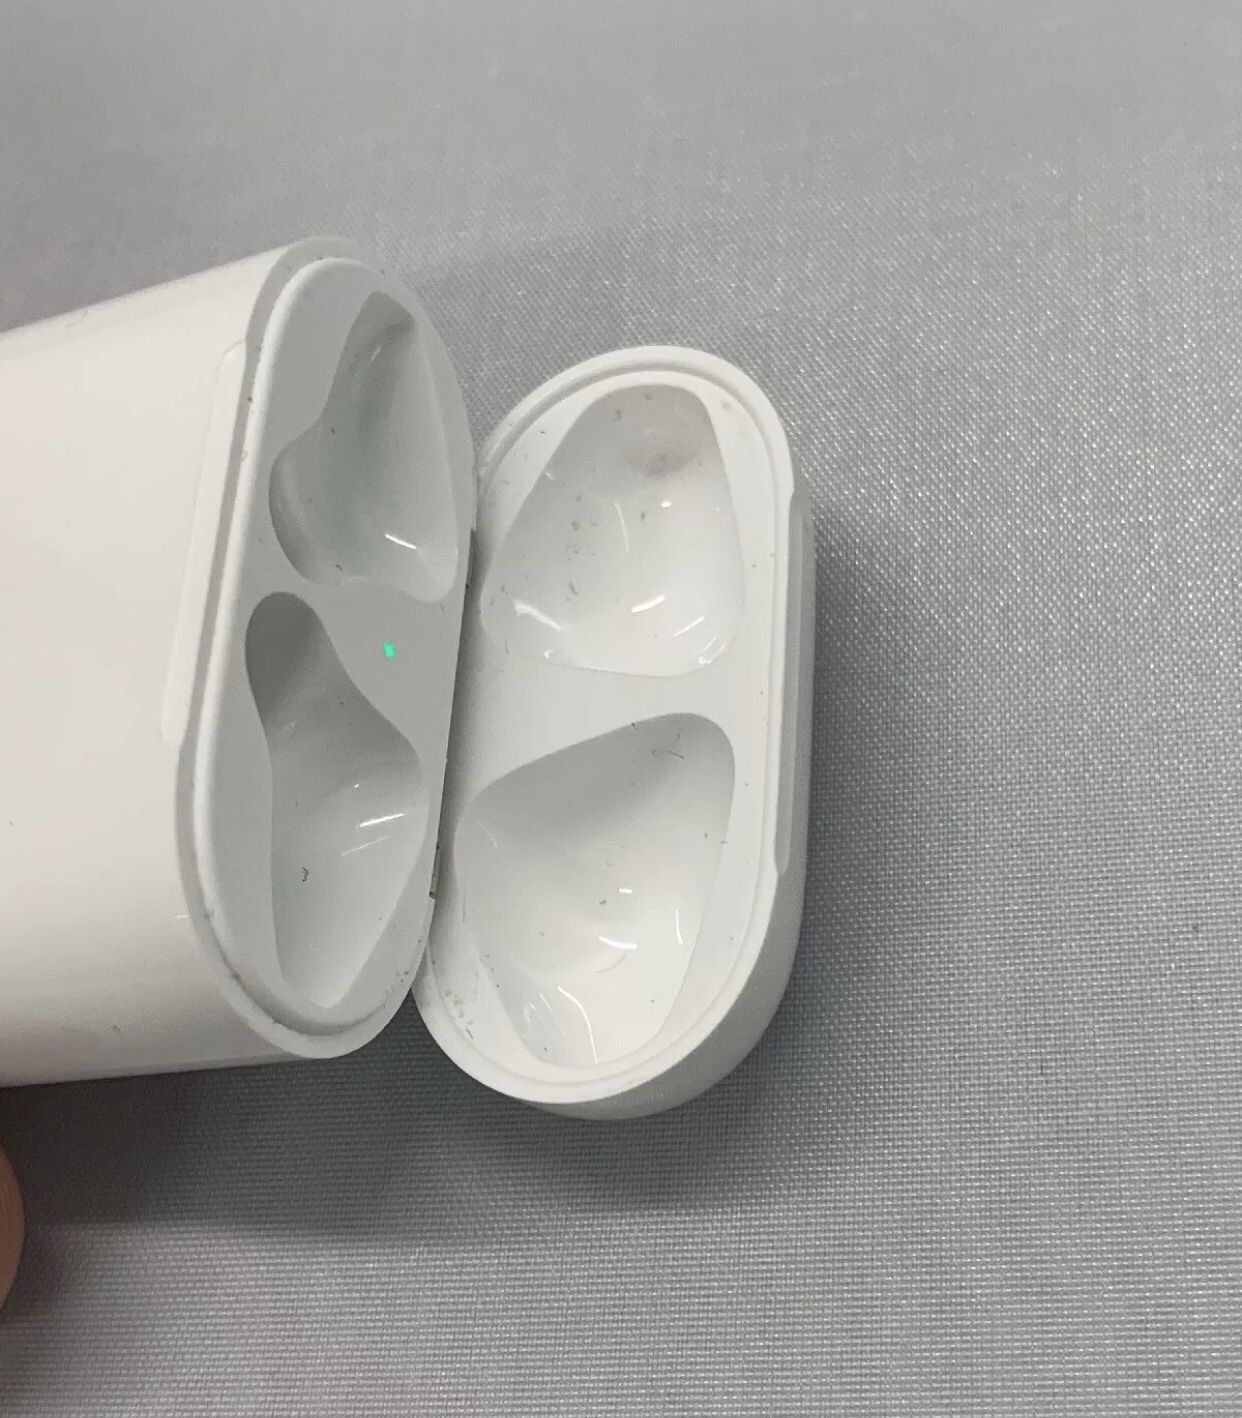 Apple airpods used